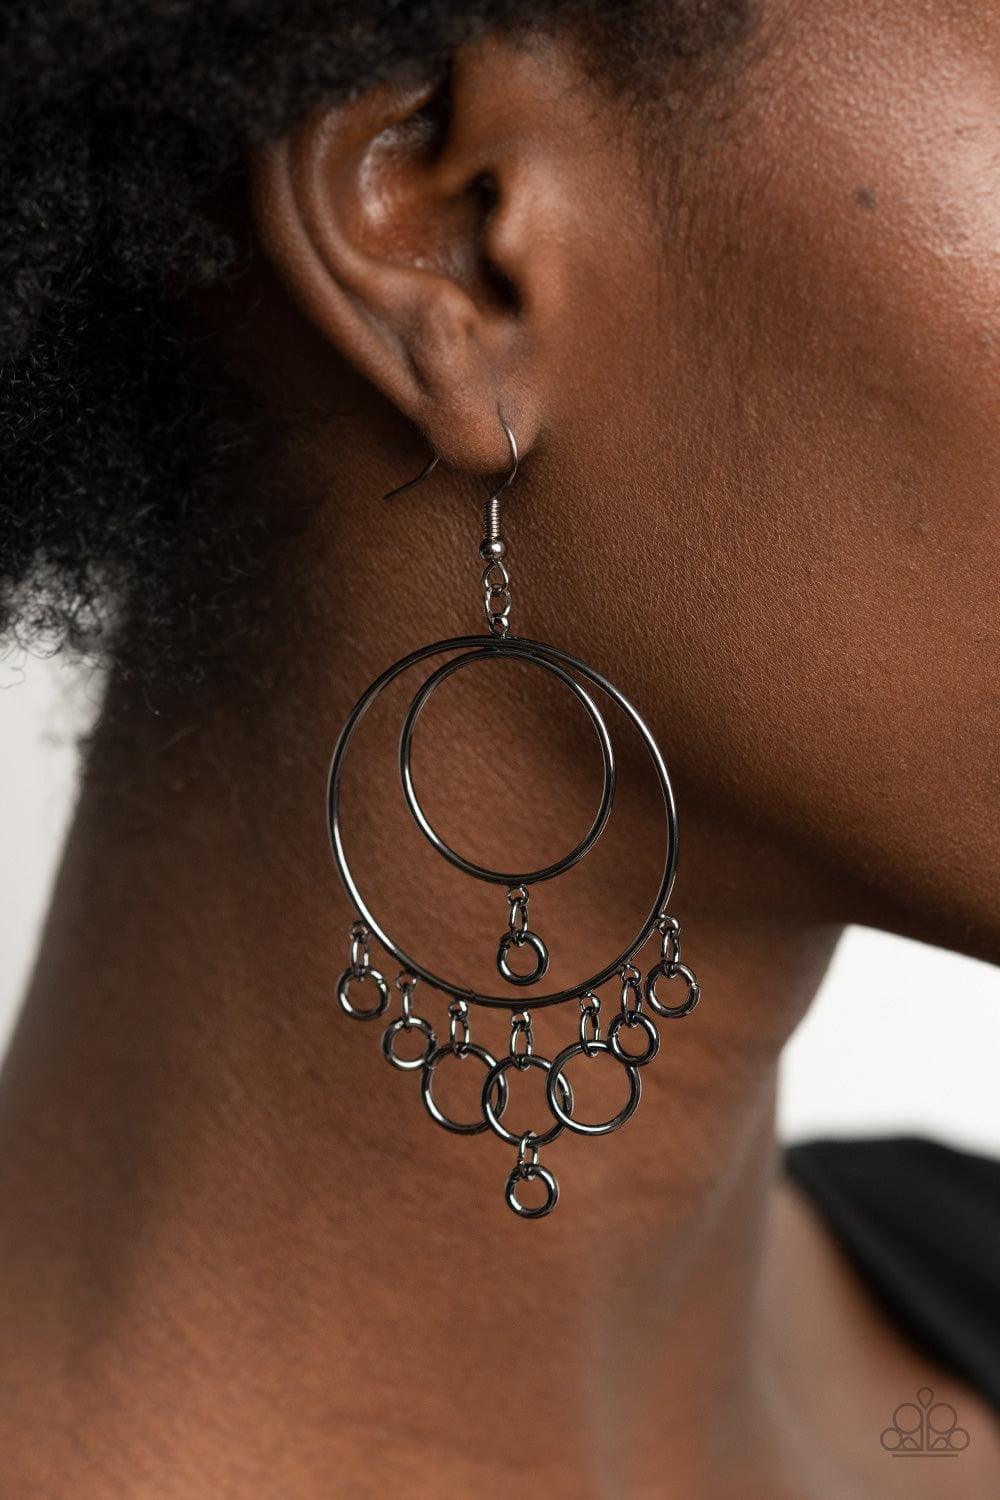 Paparazzi Accessories - Roundabout Radiance - Black Earrings - Bling by JessieK